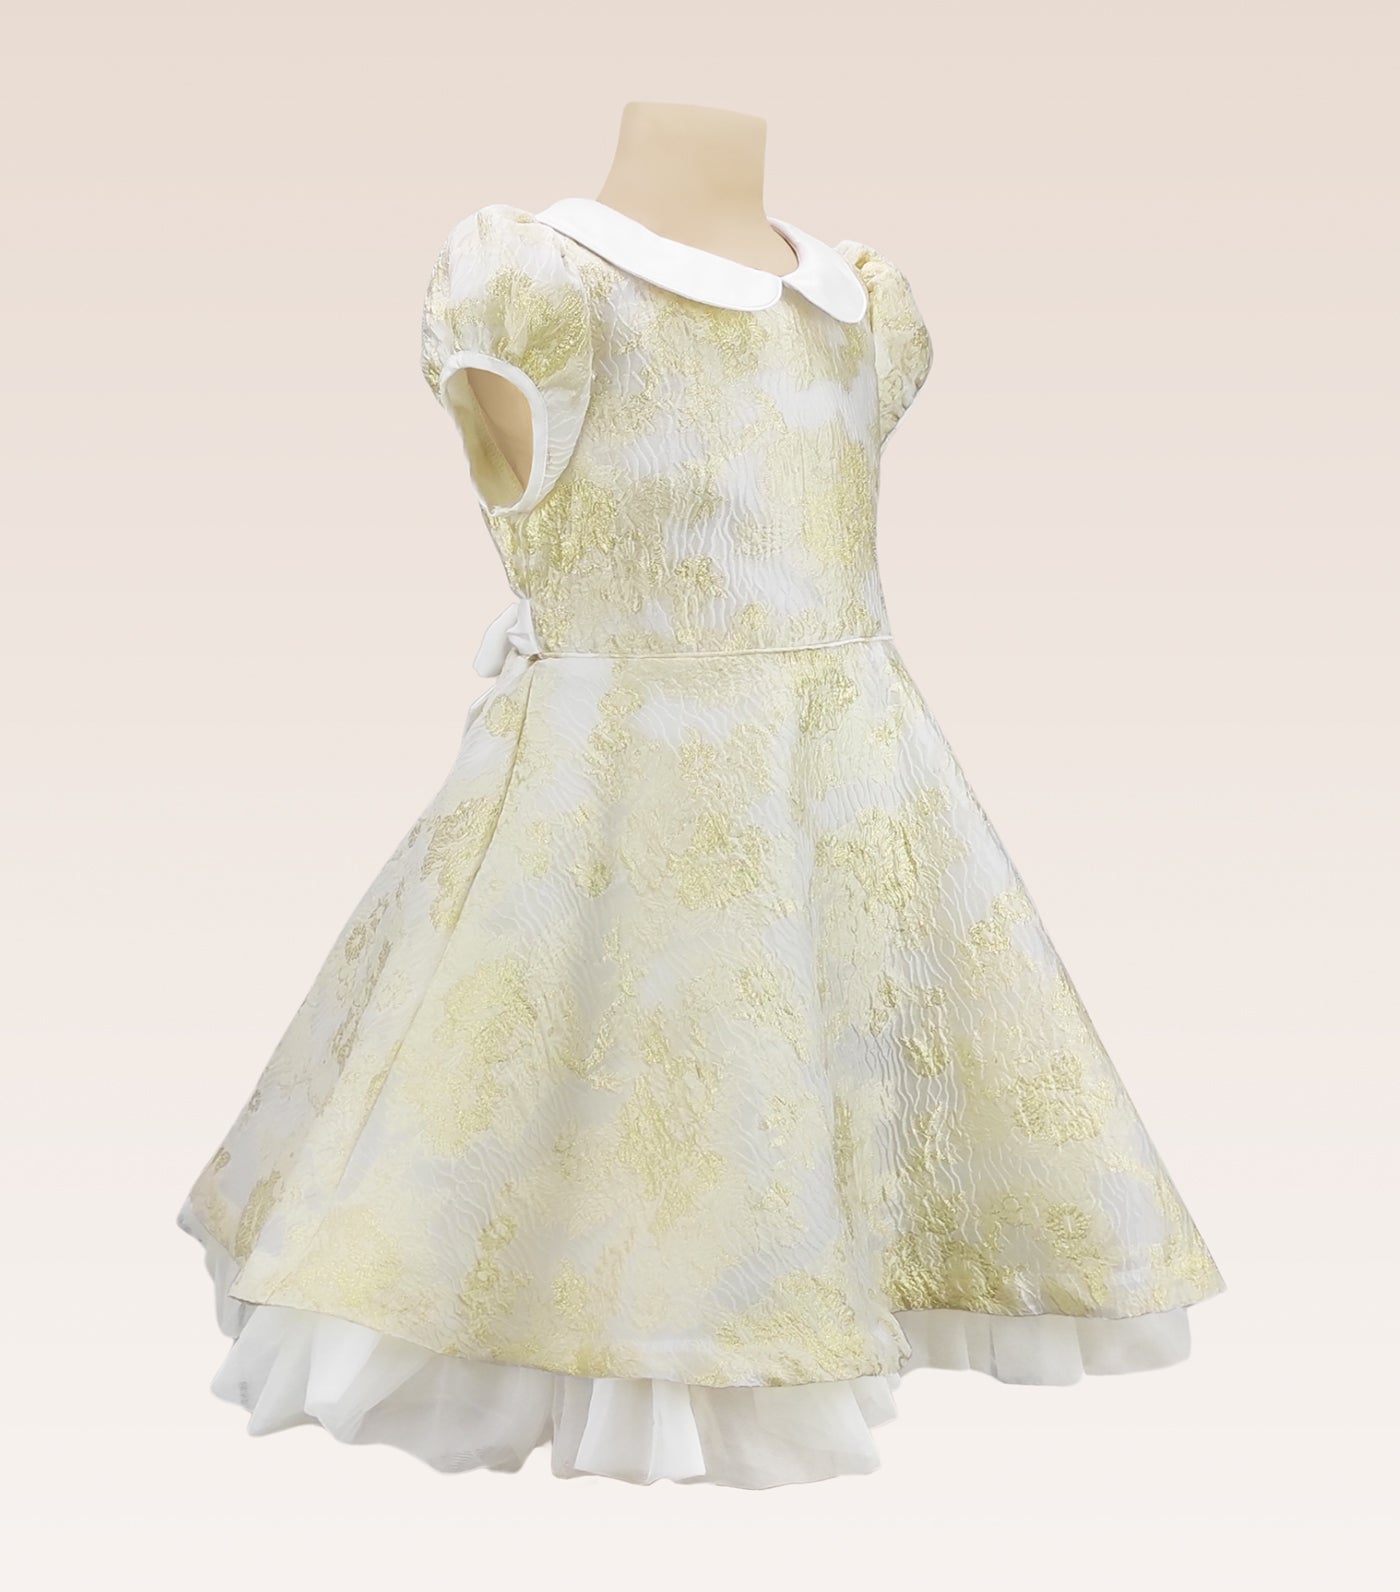 Georgette Girls Gold Jacquard Party Dress with Tulle Underlay Skirt